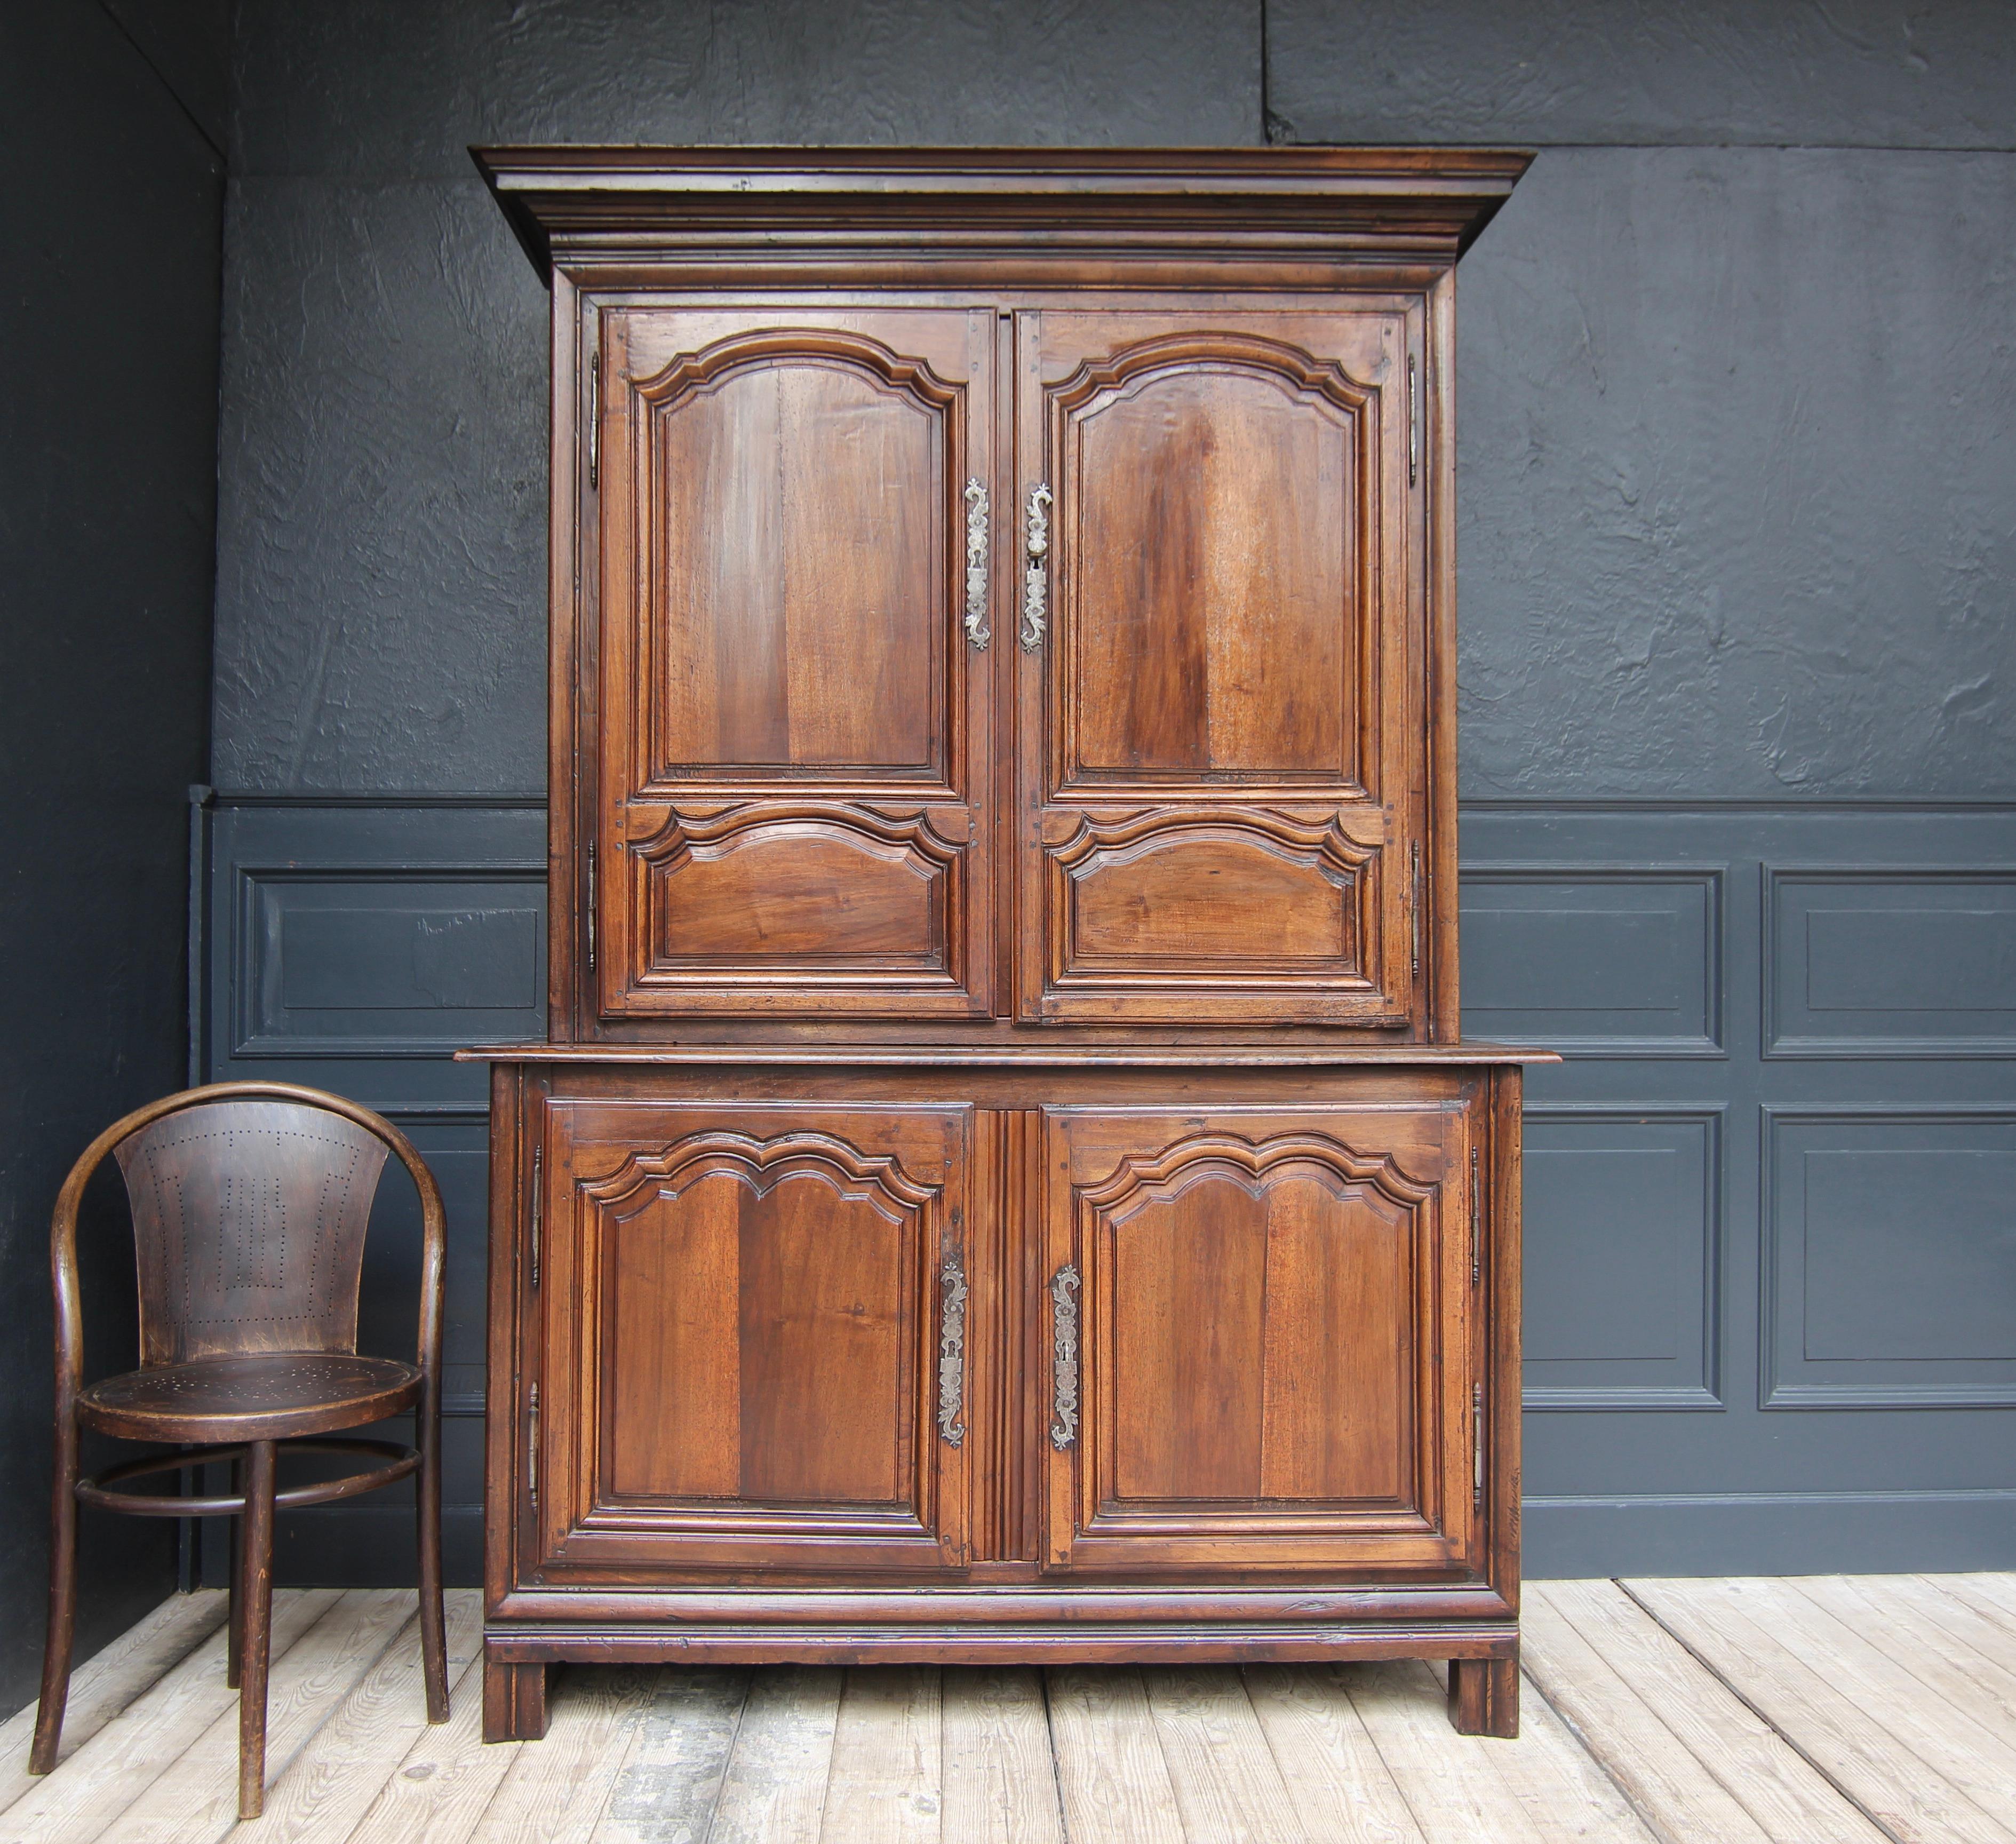 French buffet à deux corps or cabinet in Louis XIV style. Early 19th century. Made from solid walnut.

Two-part side-coffered walnut body consisting of a base cabinet with a slightly protruding profiled top panel and a slightly recessed upper